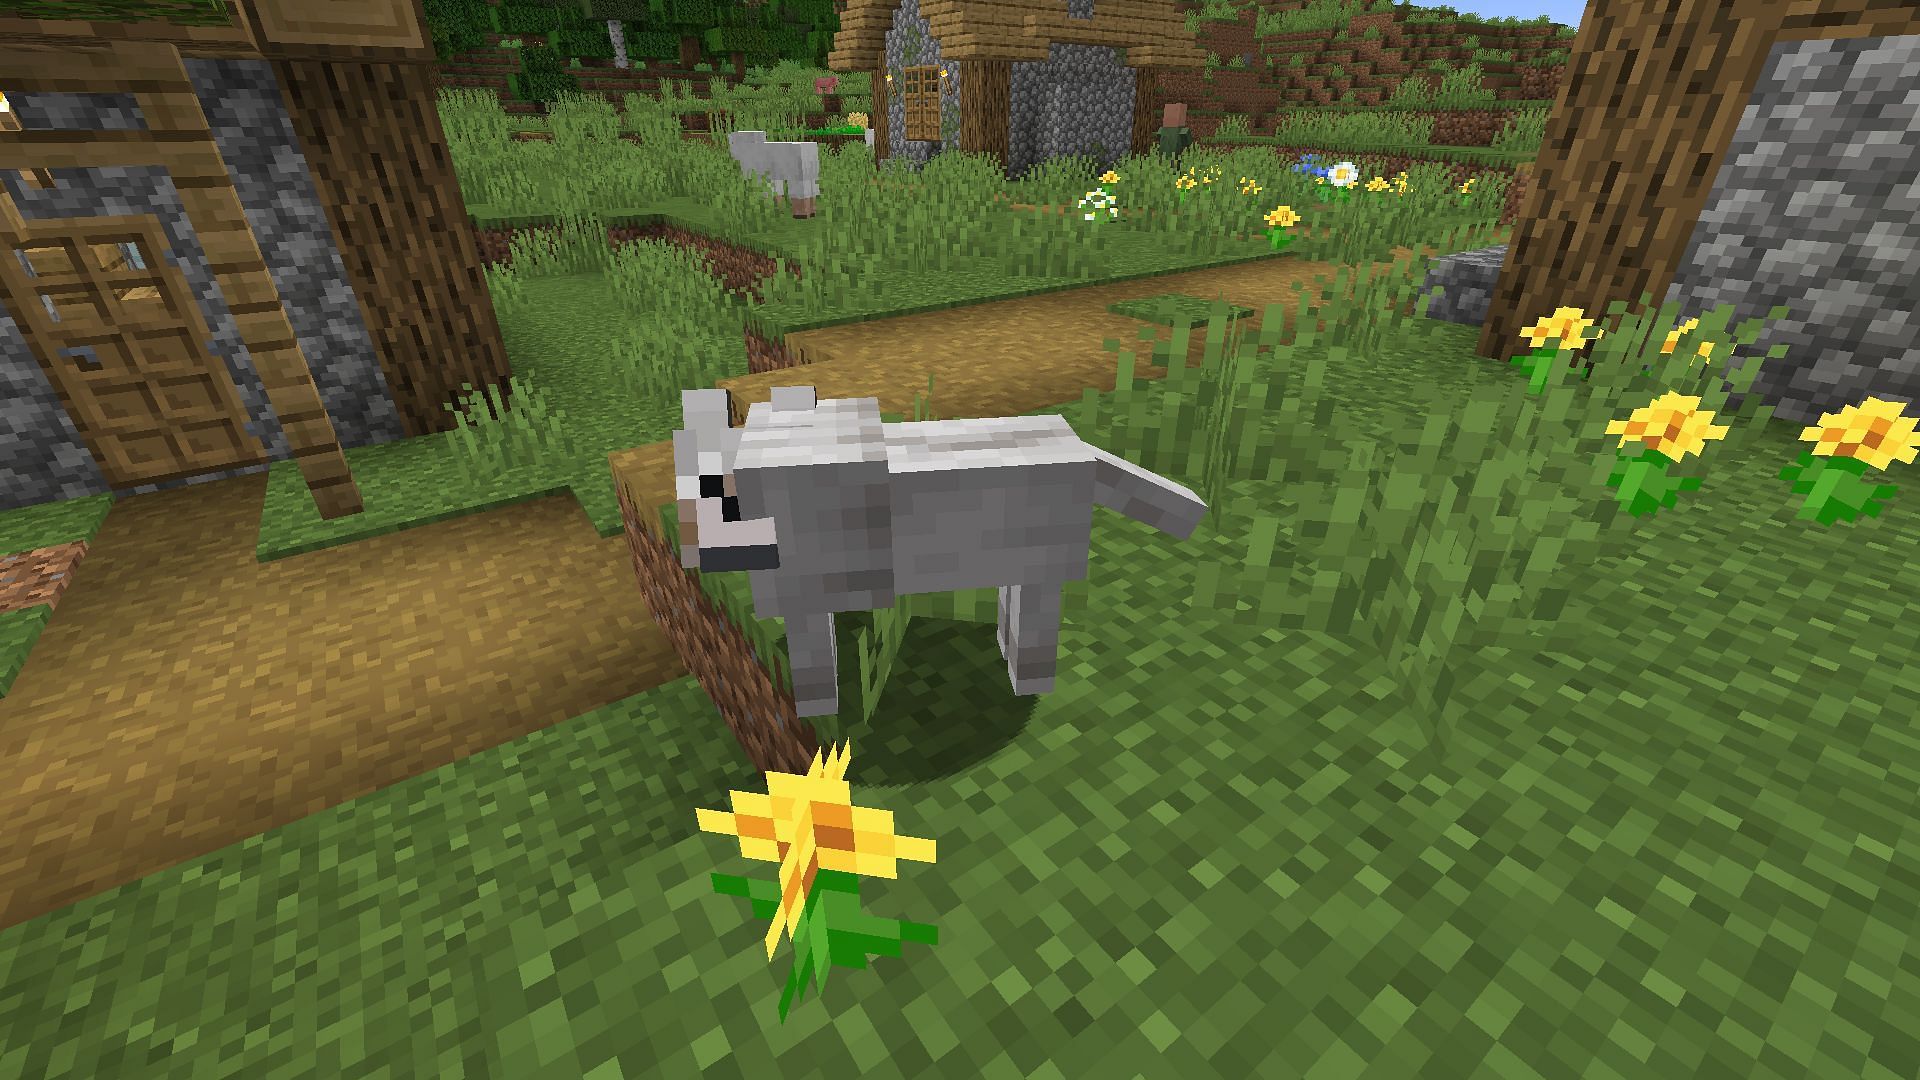 A tamed wolf with a low tail (Image via Minecraft)